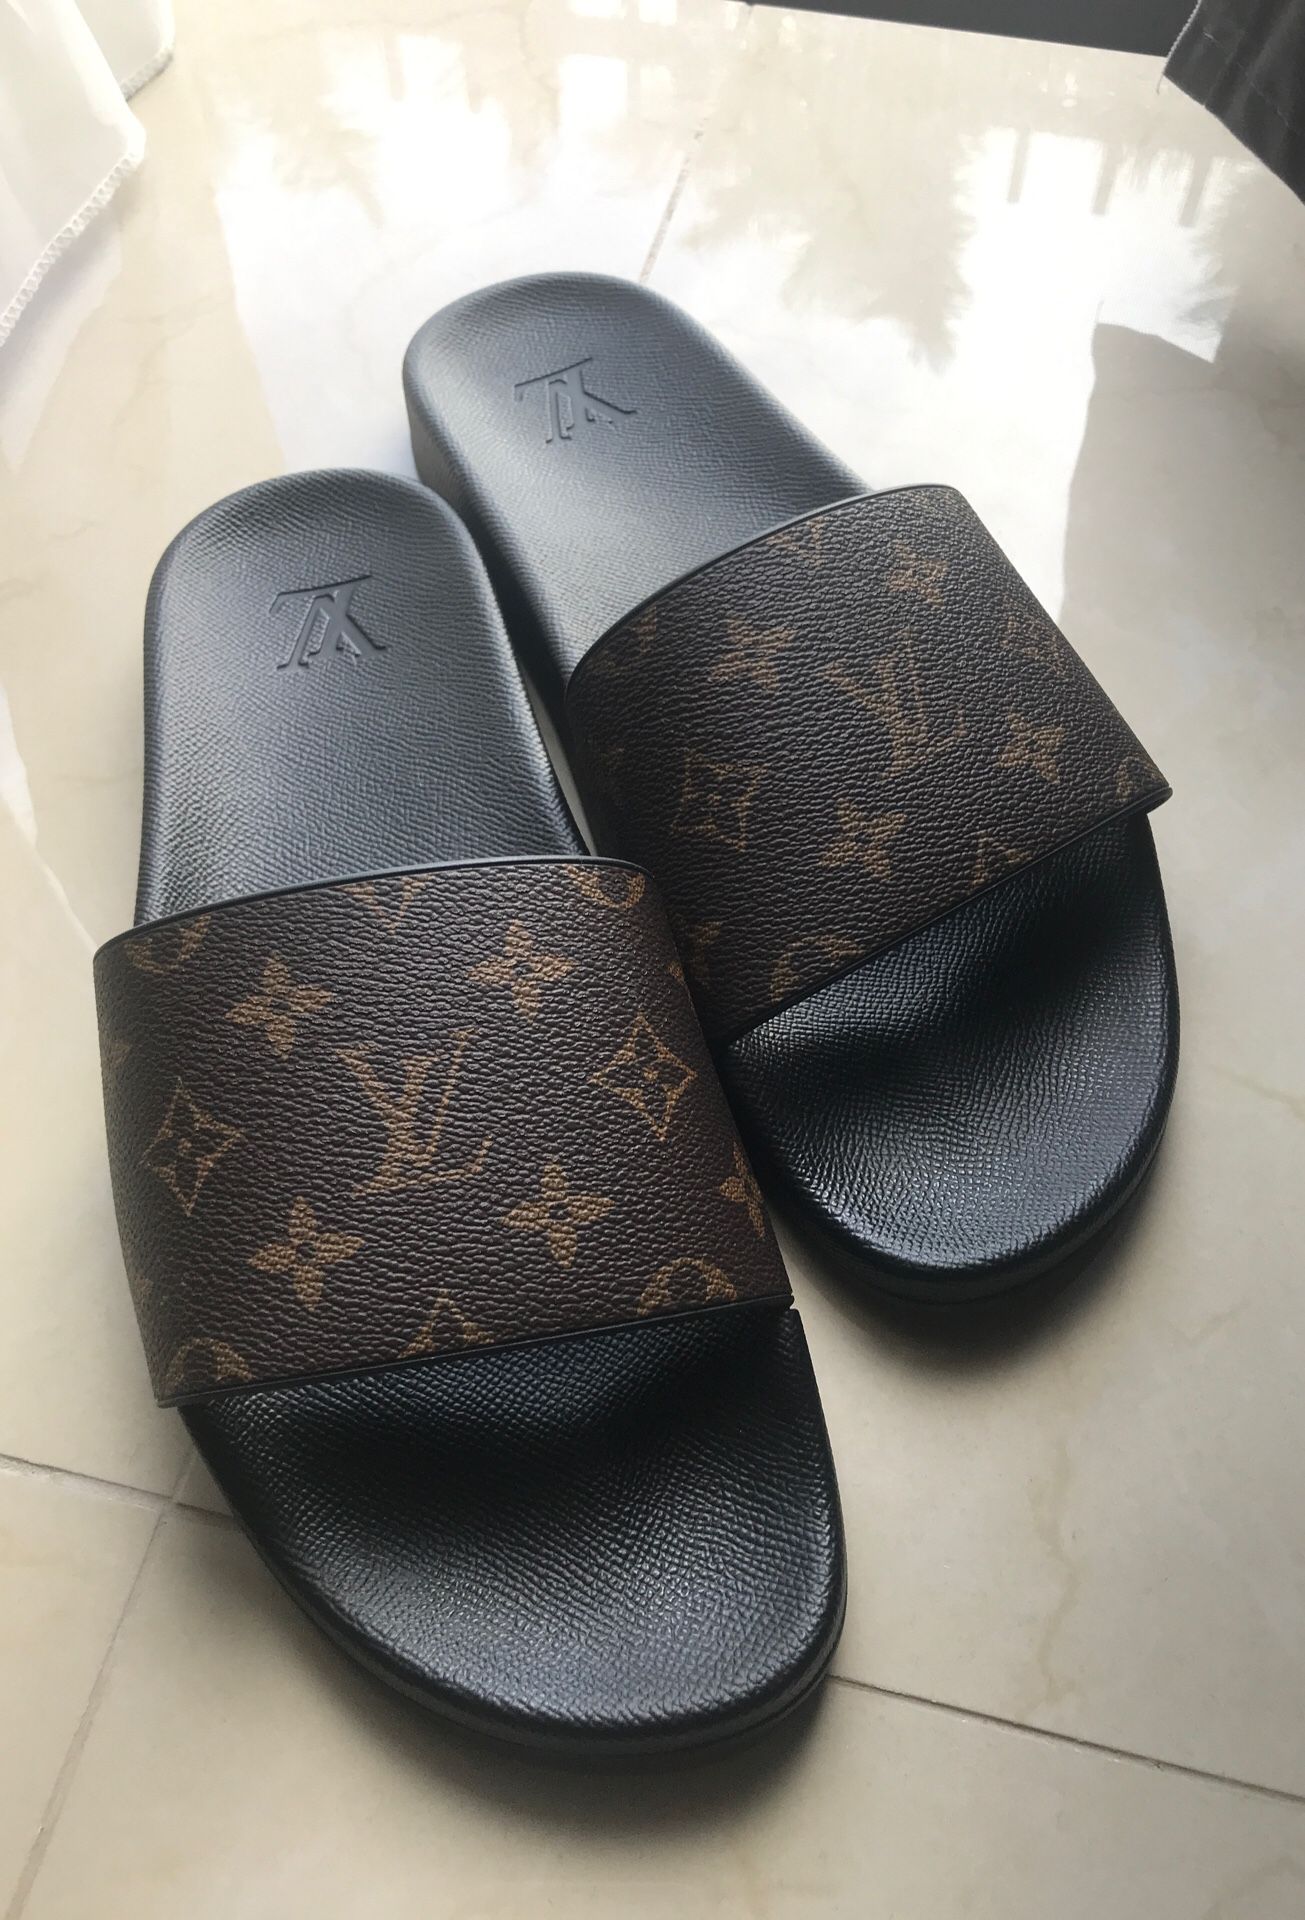 LOUIS VUITTON SANDALS 39 Used GREAT CONDITION for Sale in Las Vegas, NV -  OfferUp